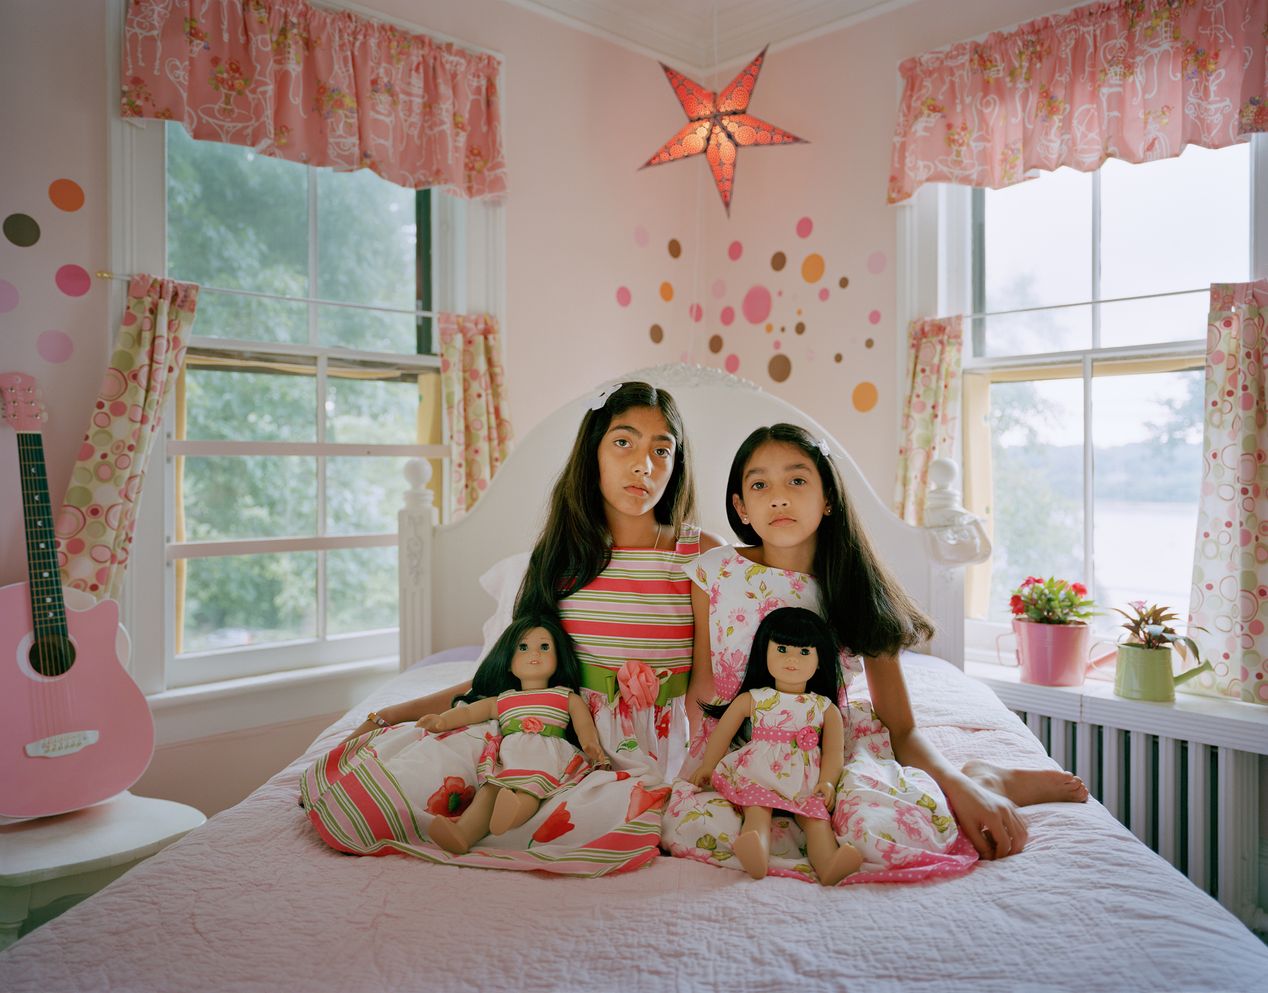 Two sisters sitting on a bed with their lookalike dolls, environmental portrait photography, Ilona Szwarc, contemporary Los Angeles artist.